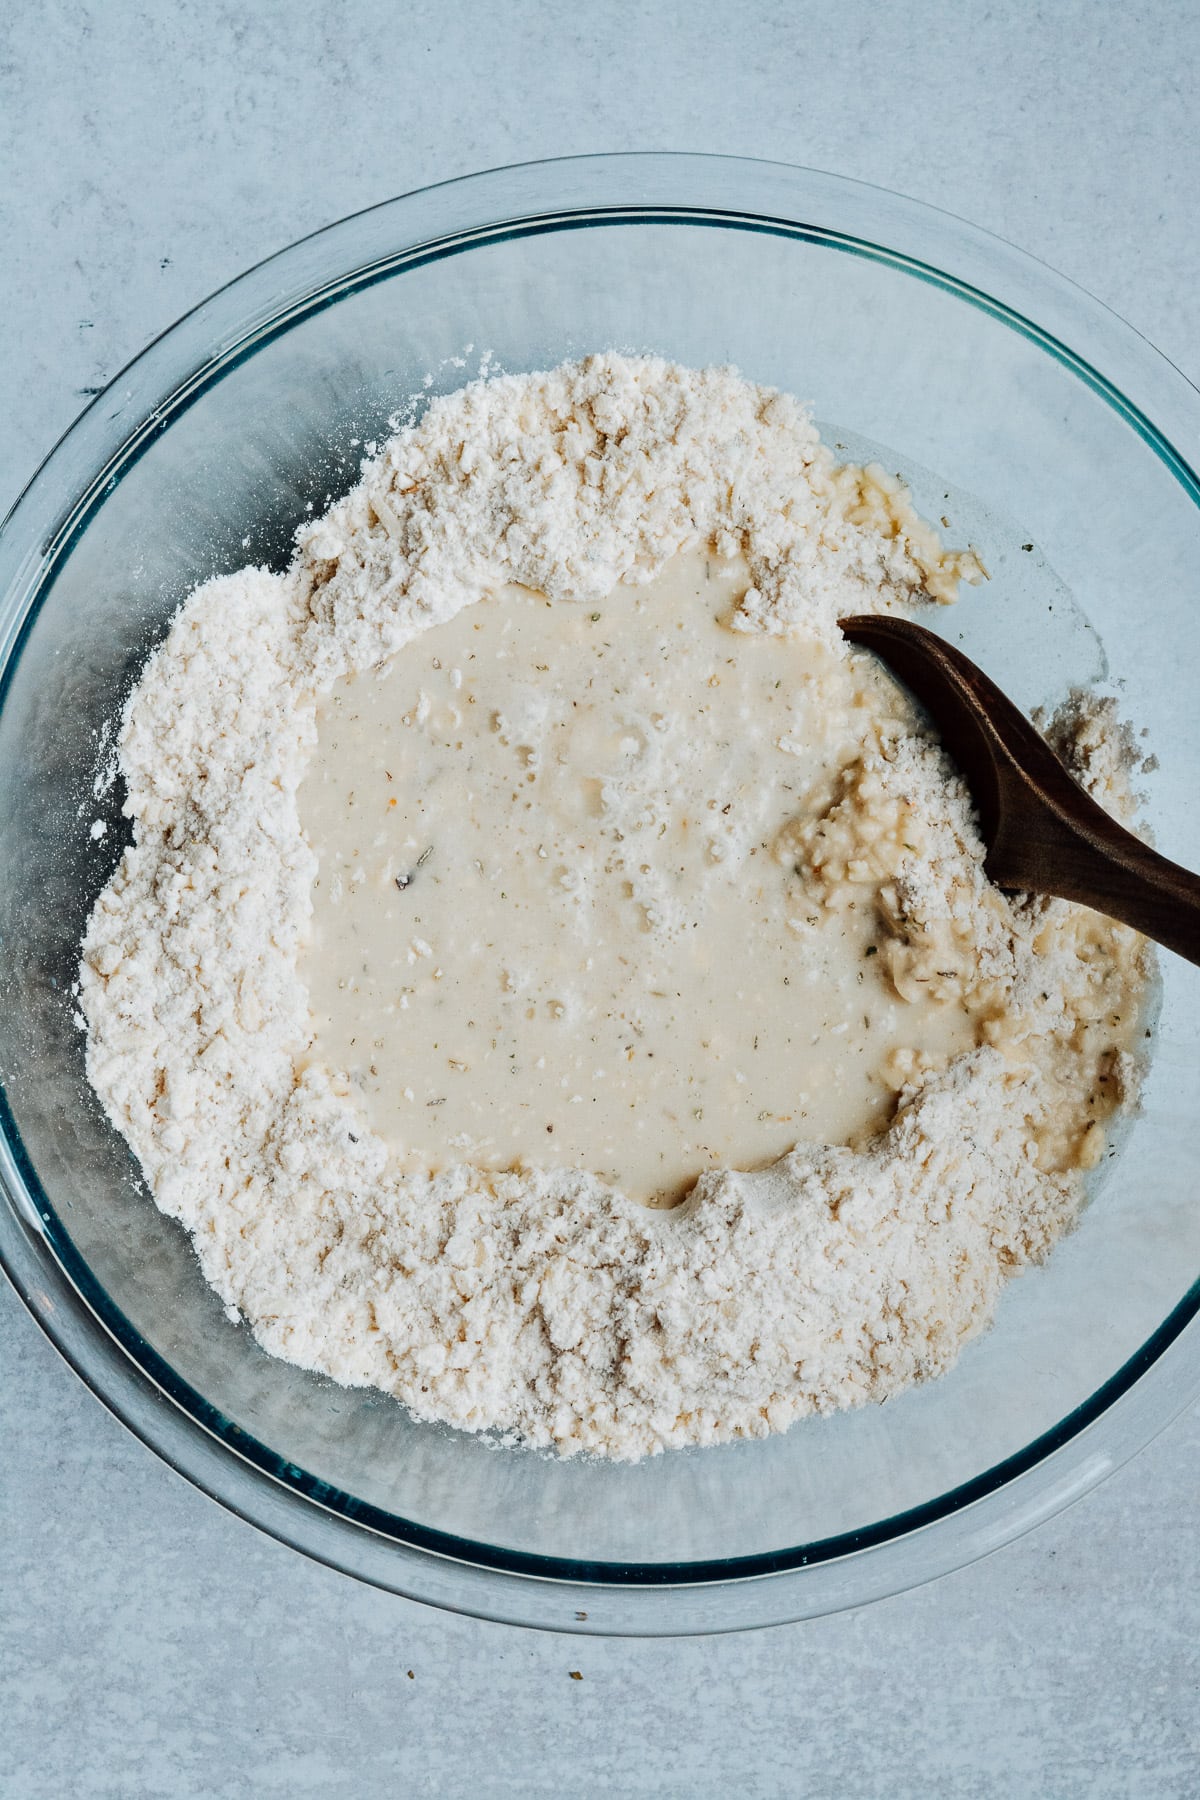 Bowl of butter and flour mixture with milk in center.